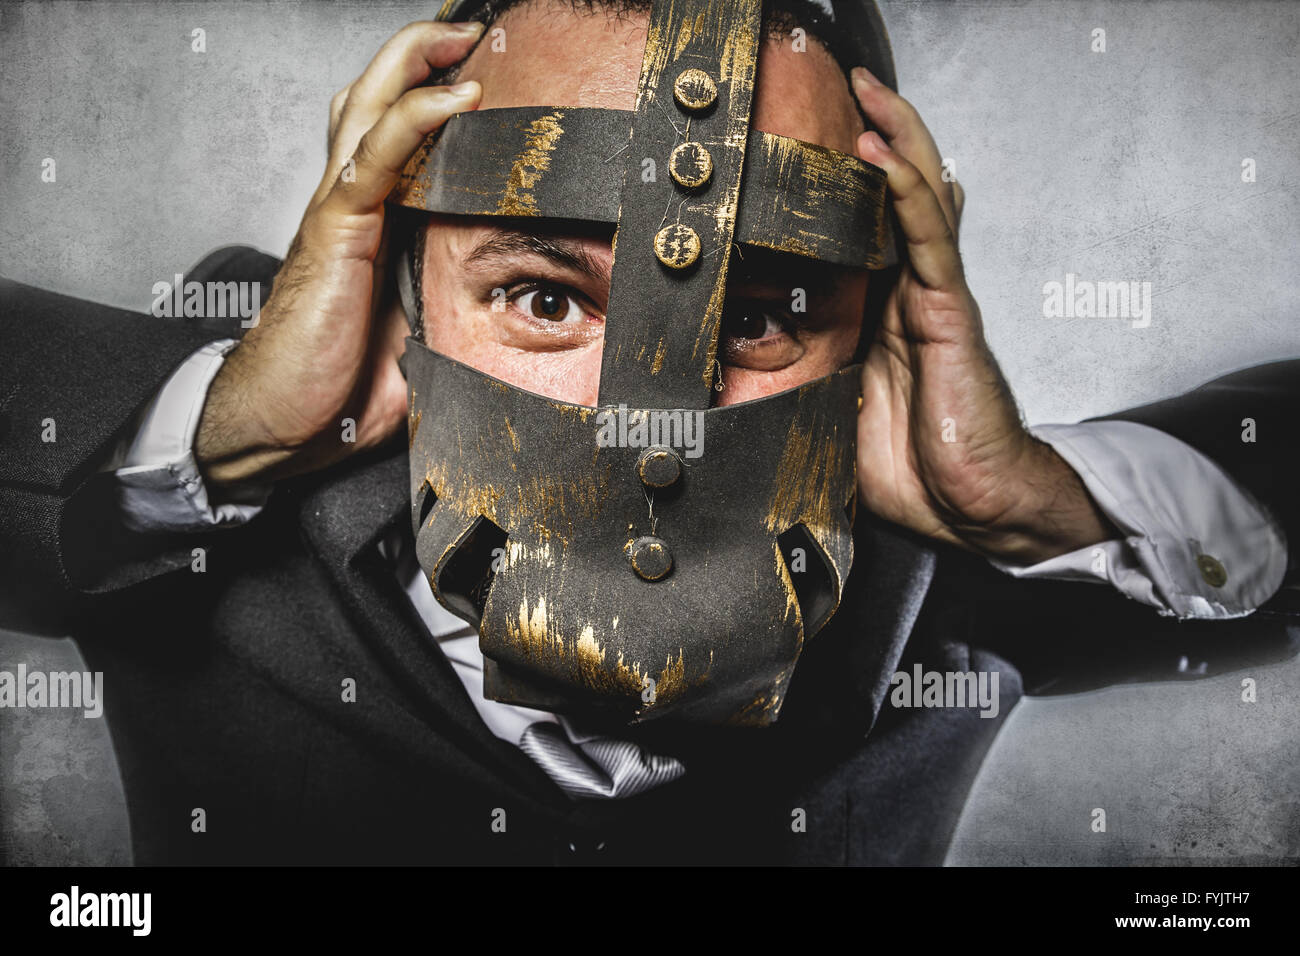 manager, dangerous business man with iron mask and expressions Stock Photo